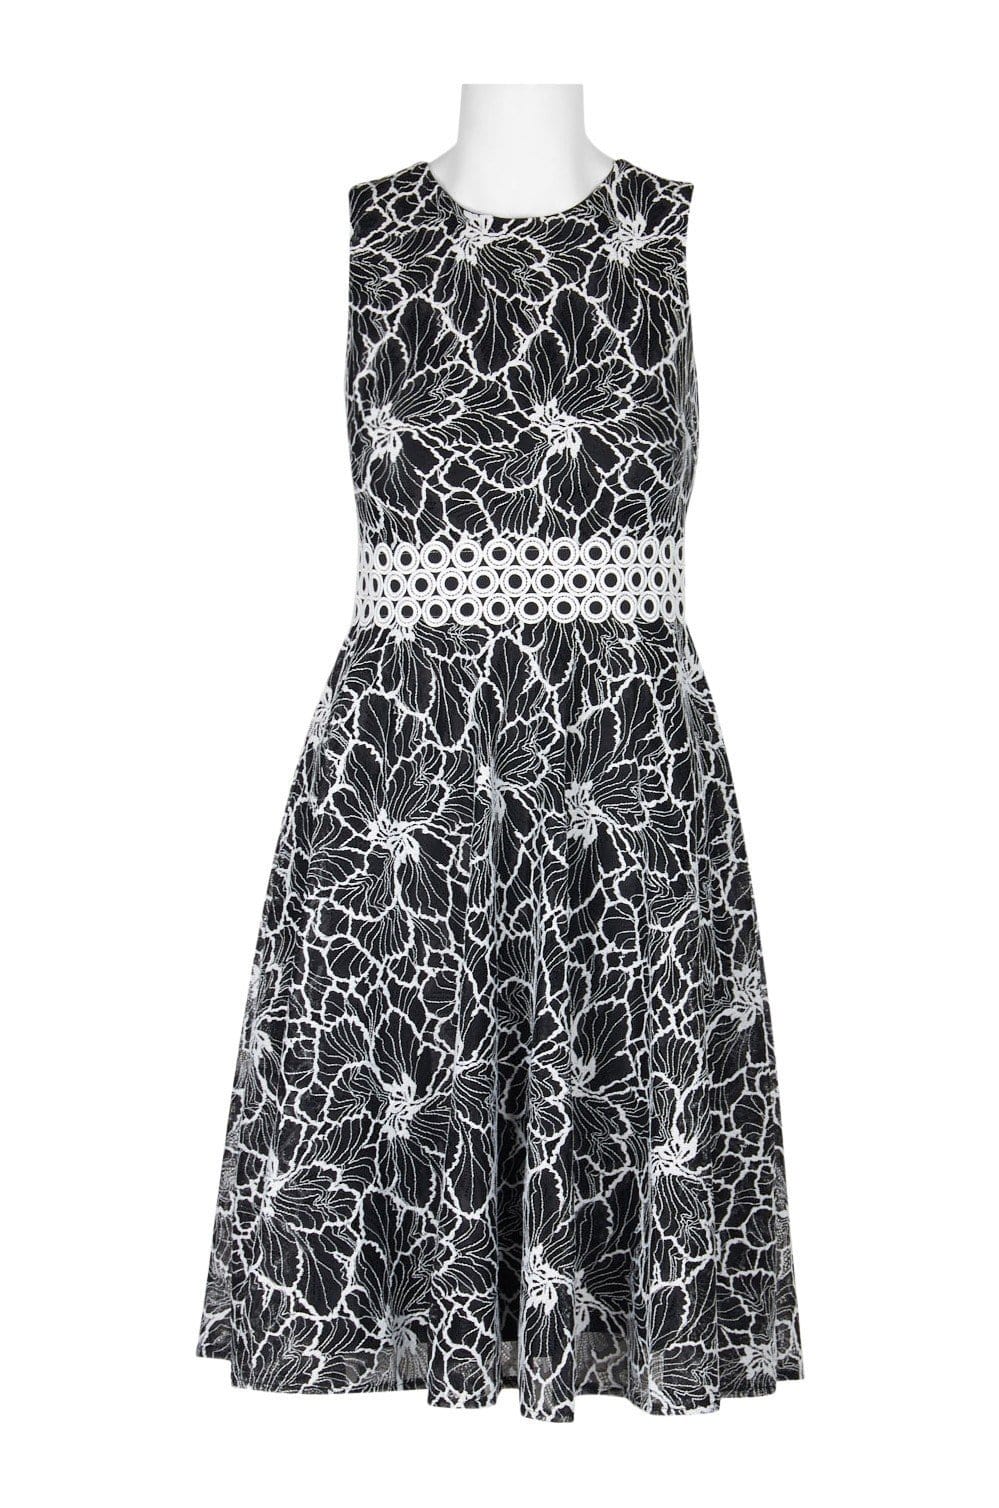 Taylor - 9777M Sleeveless Floral Print Lace Waist Dress In Black and White